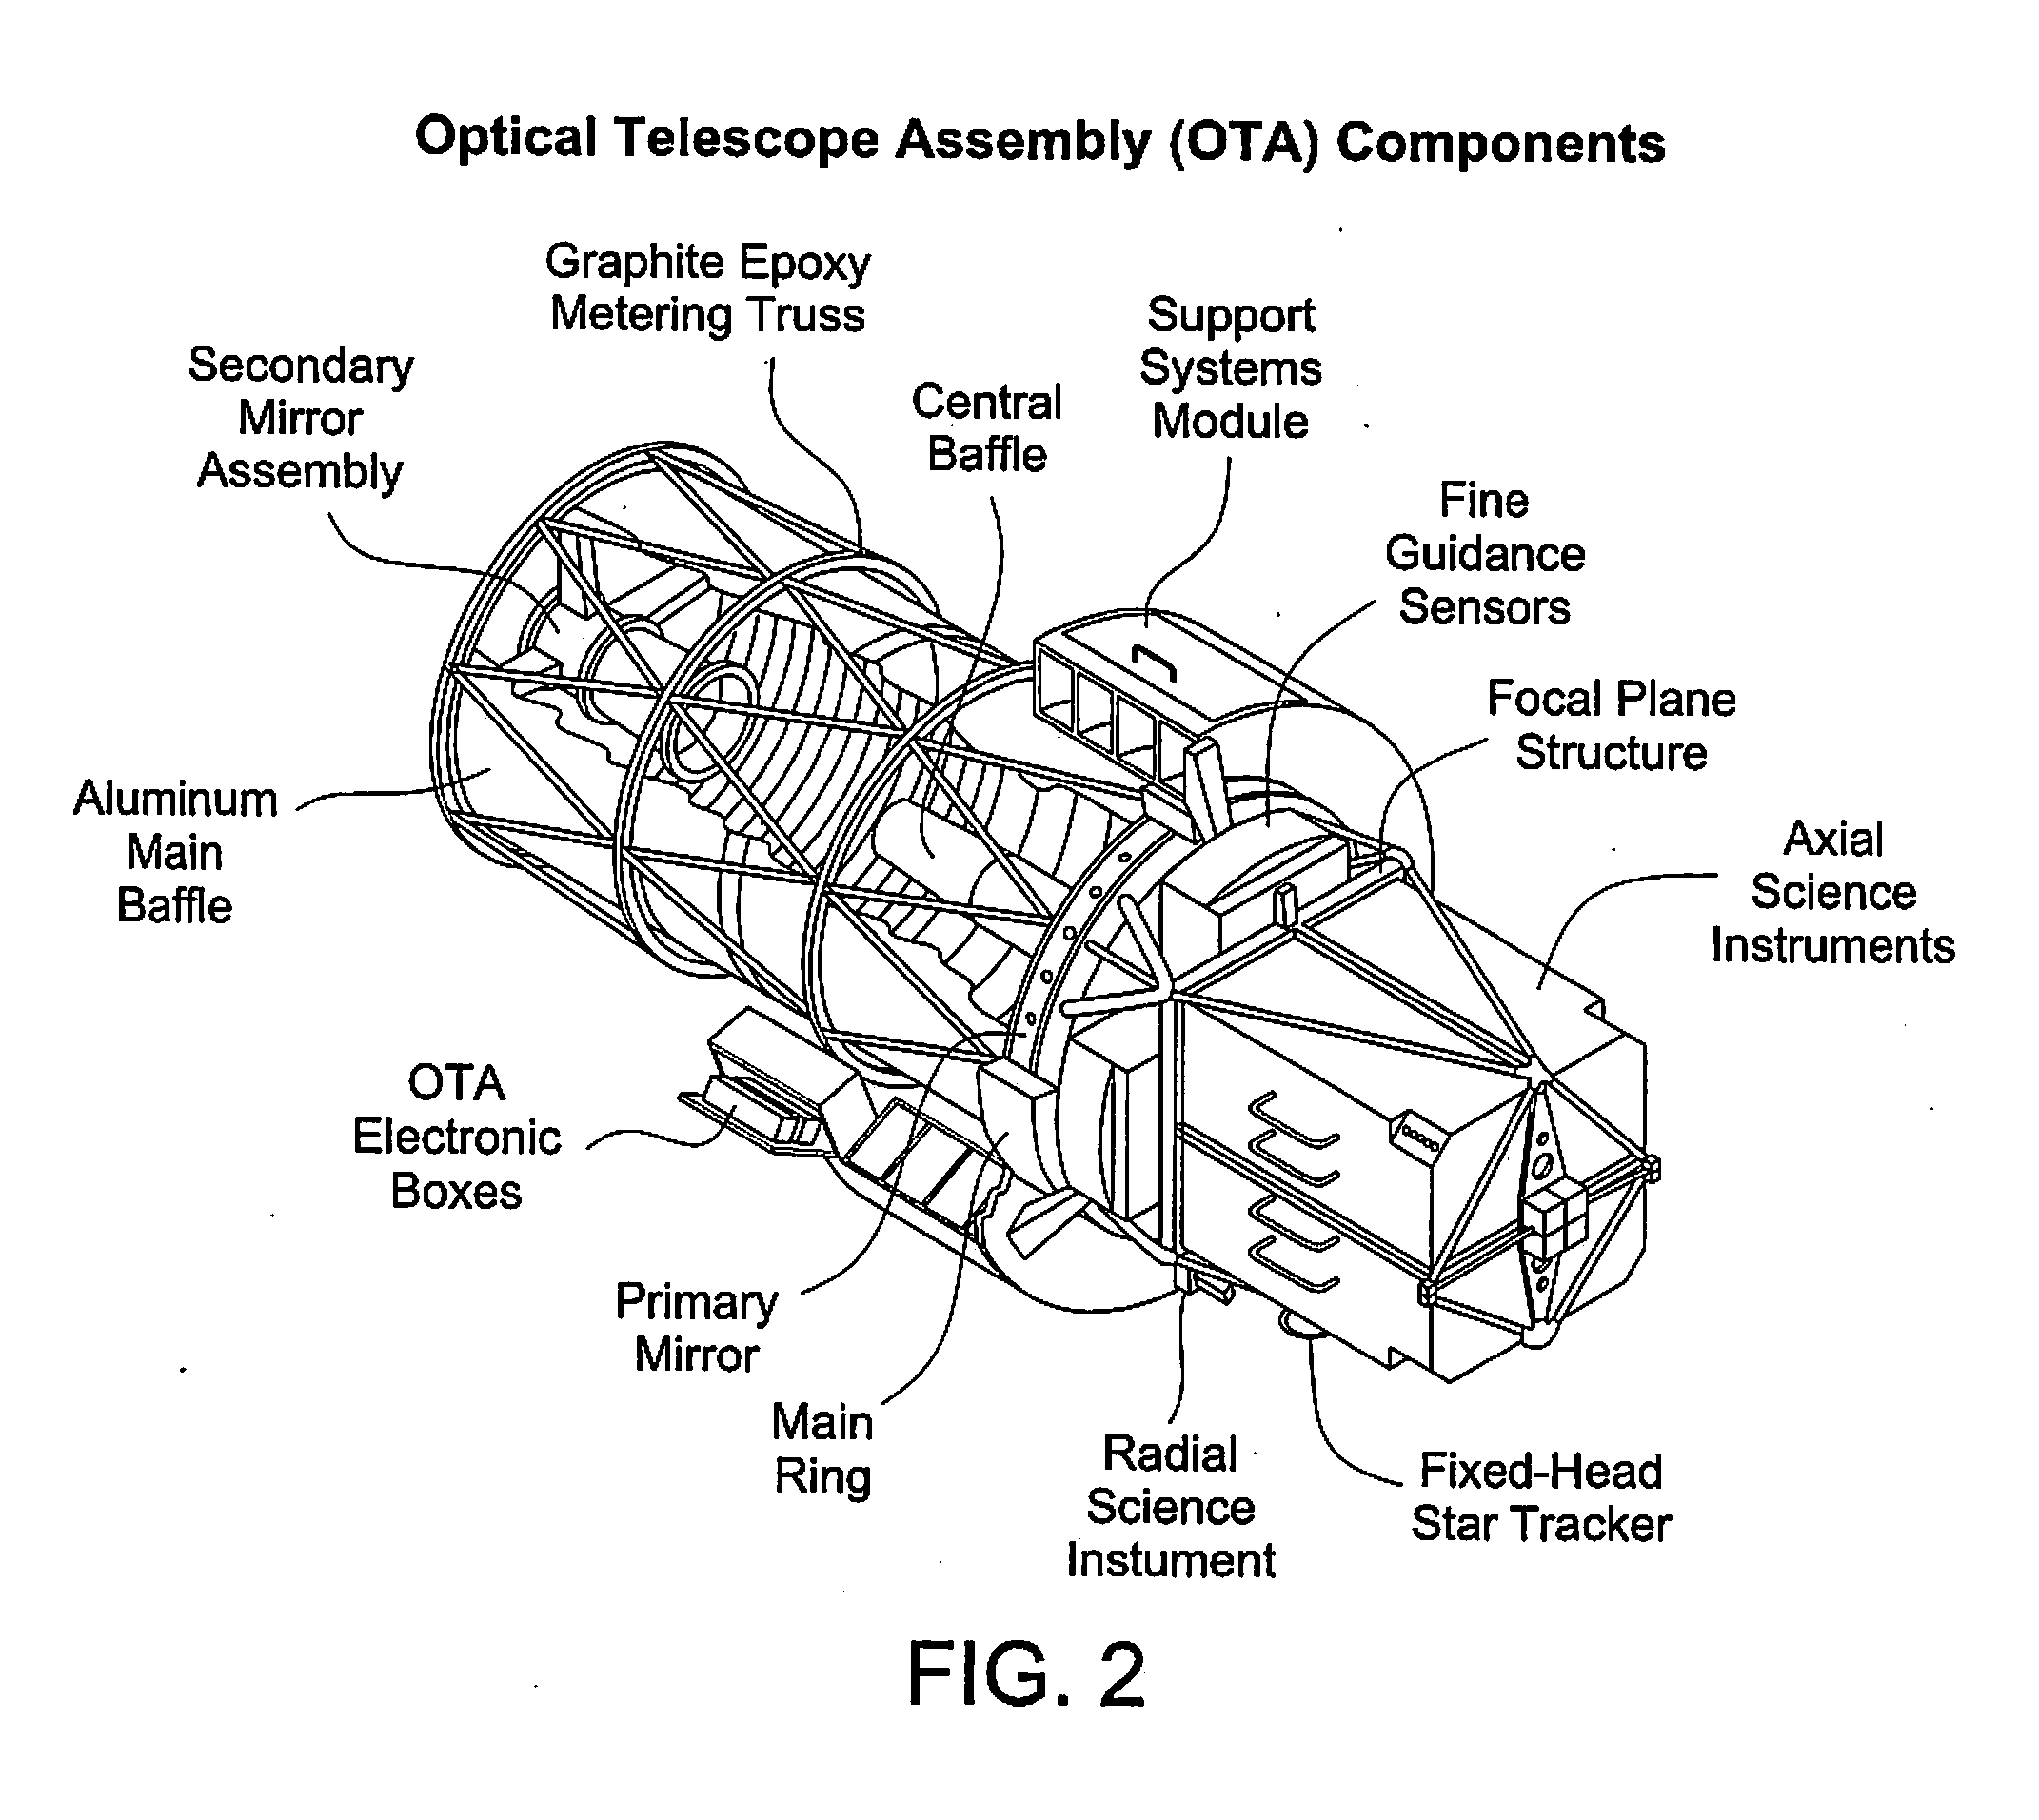 Method and Associated Apparatus for Capturing, Servicing, and De-Orbiting Earth Satellites Using Robotics